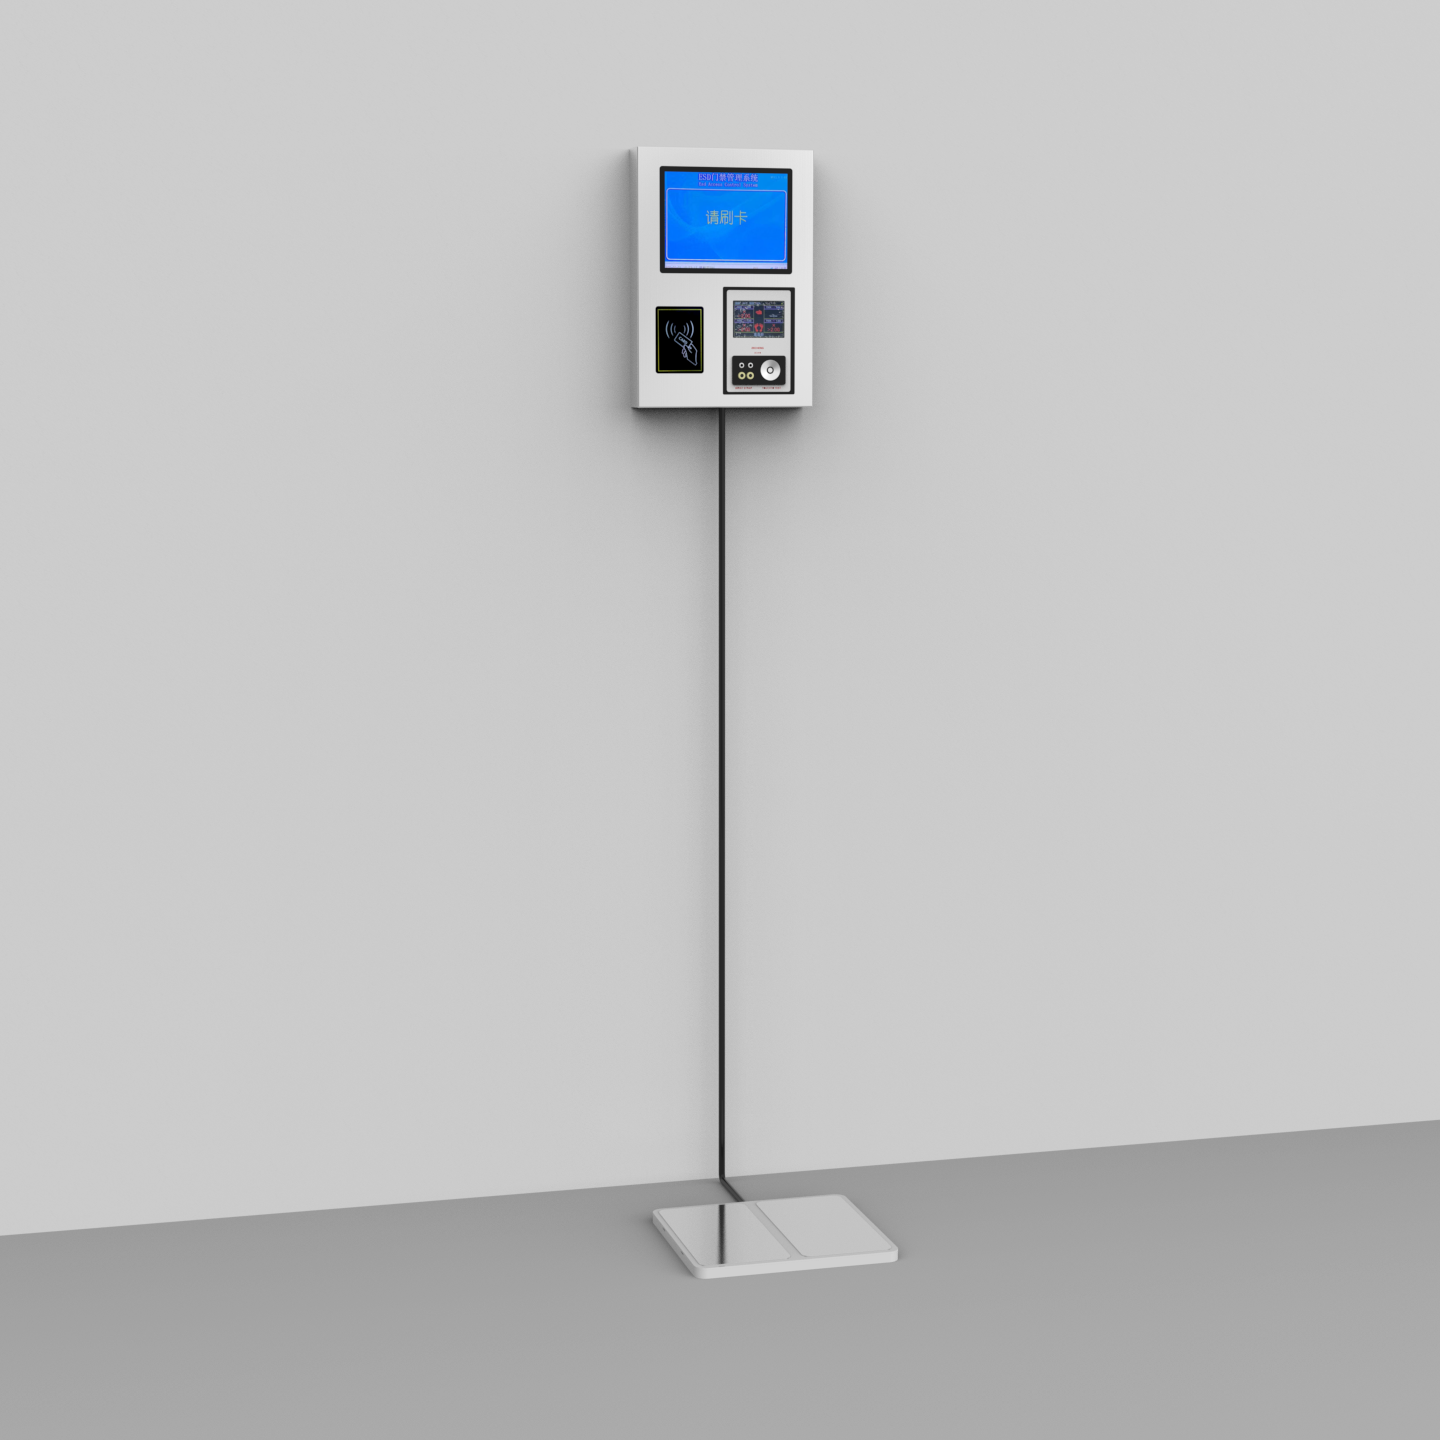 Test authority for ESD anti-static access control system